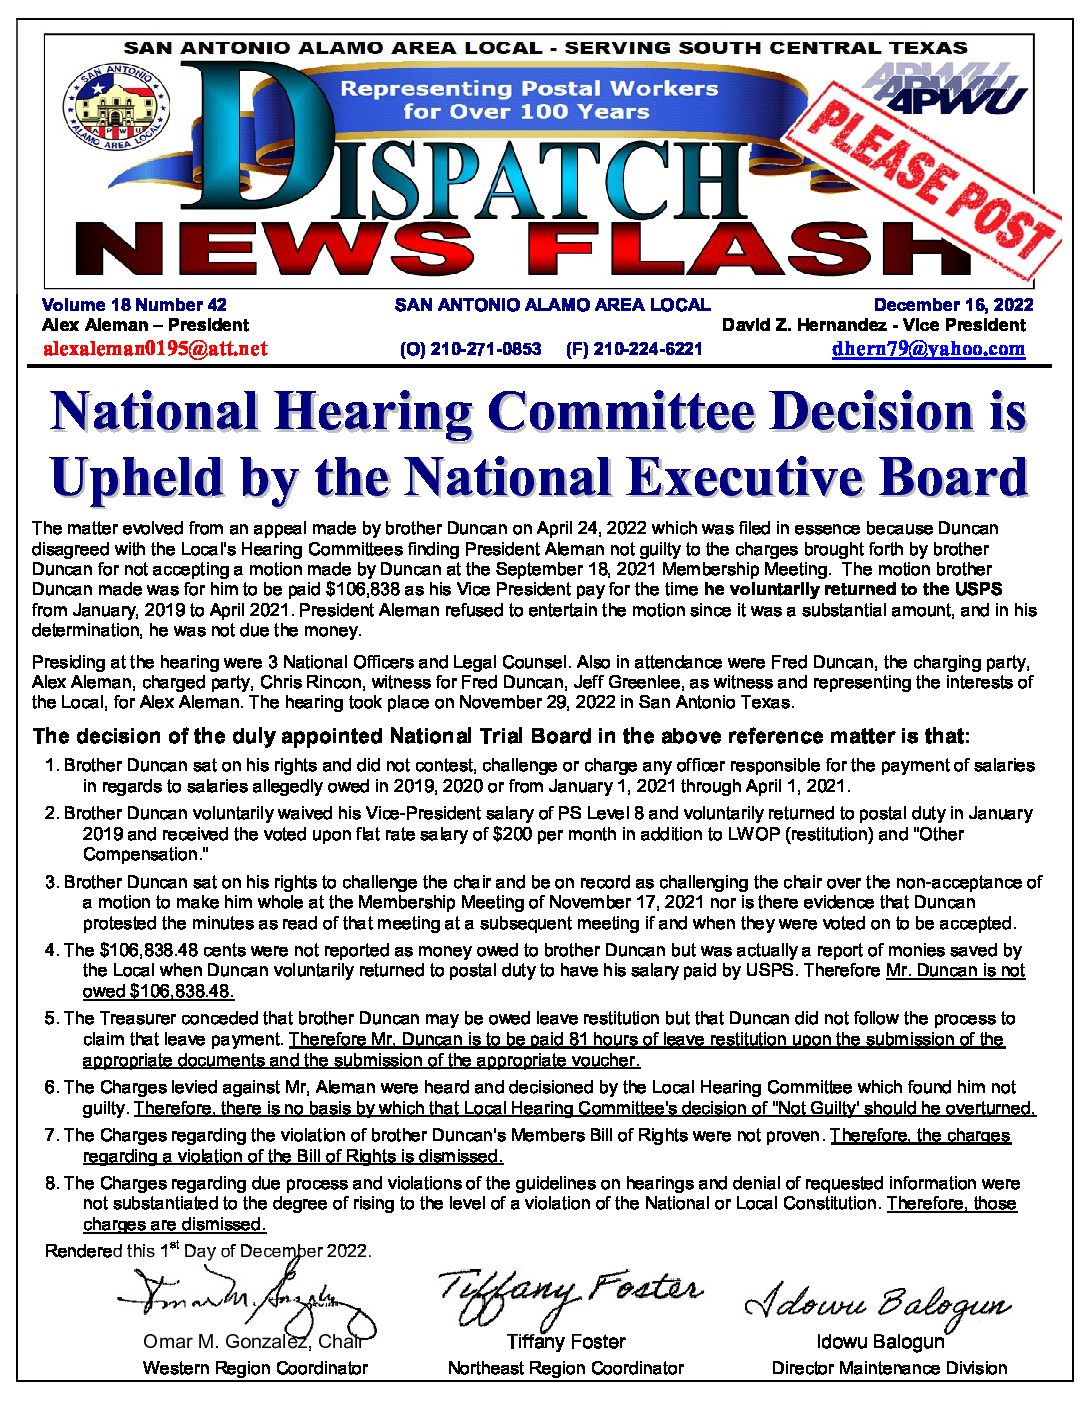 NewsFlash 18-42 – National Hearing Committee Decision - 